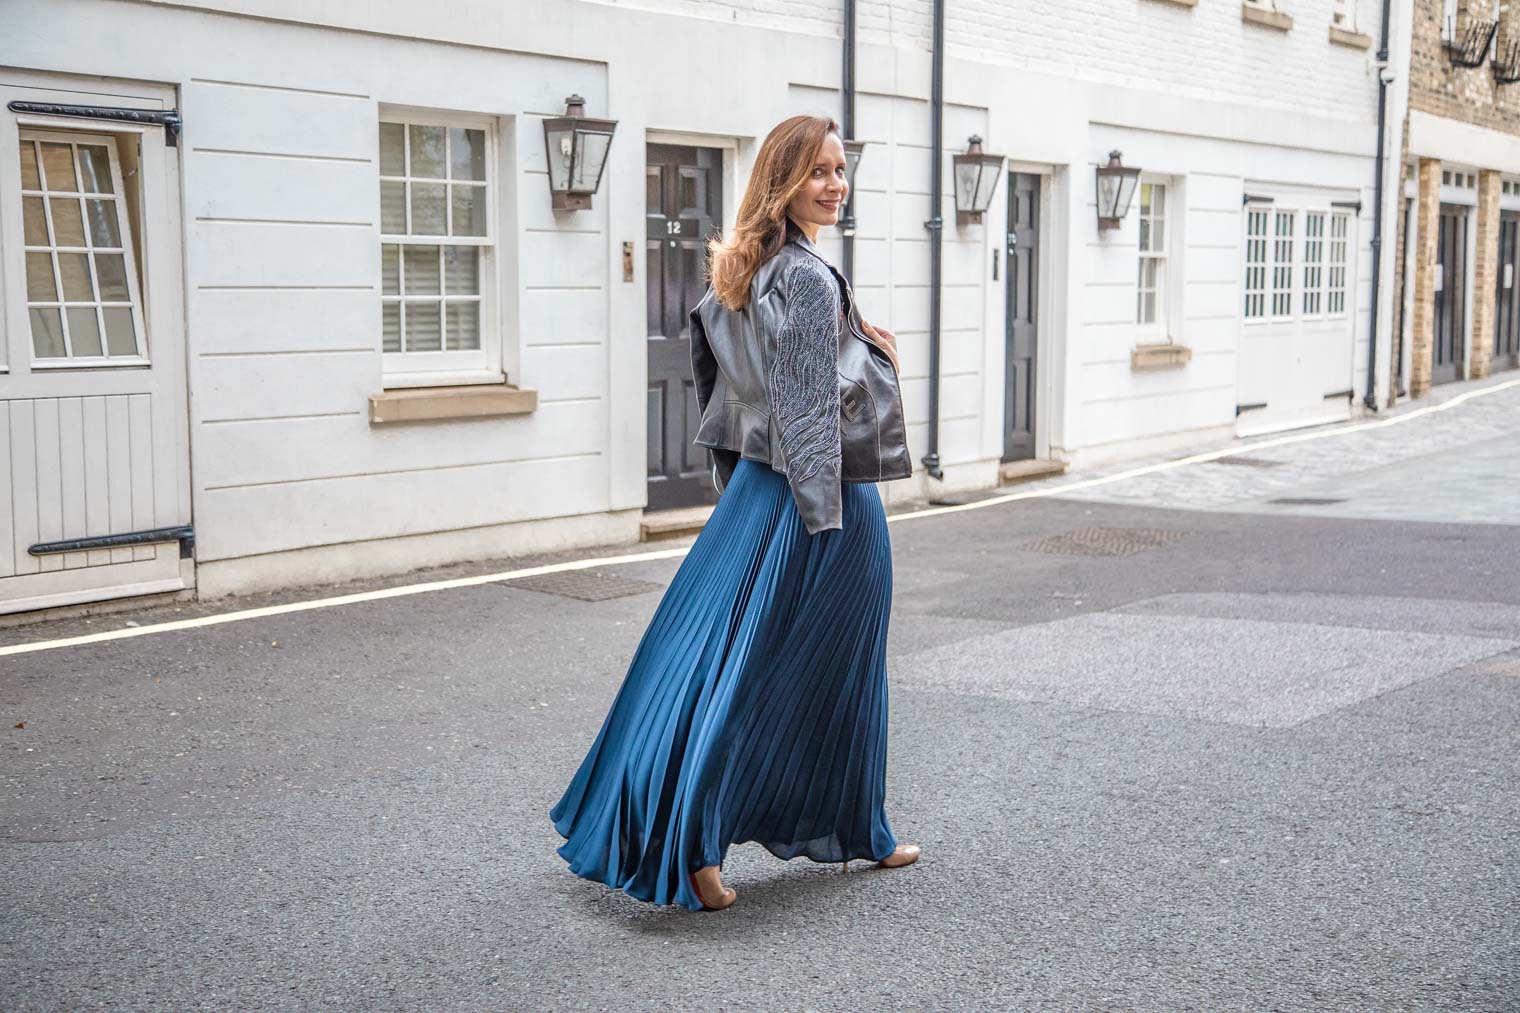 Petra from Chic Journal wearing pleated maxi skirt by Tara Jarmon